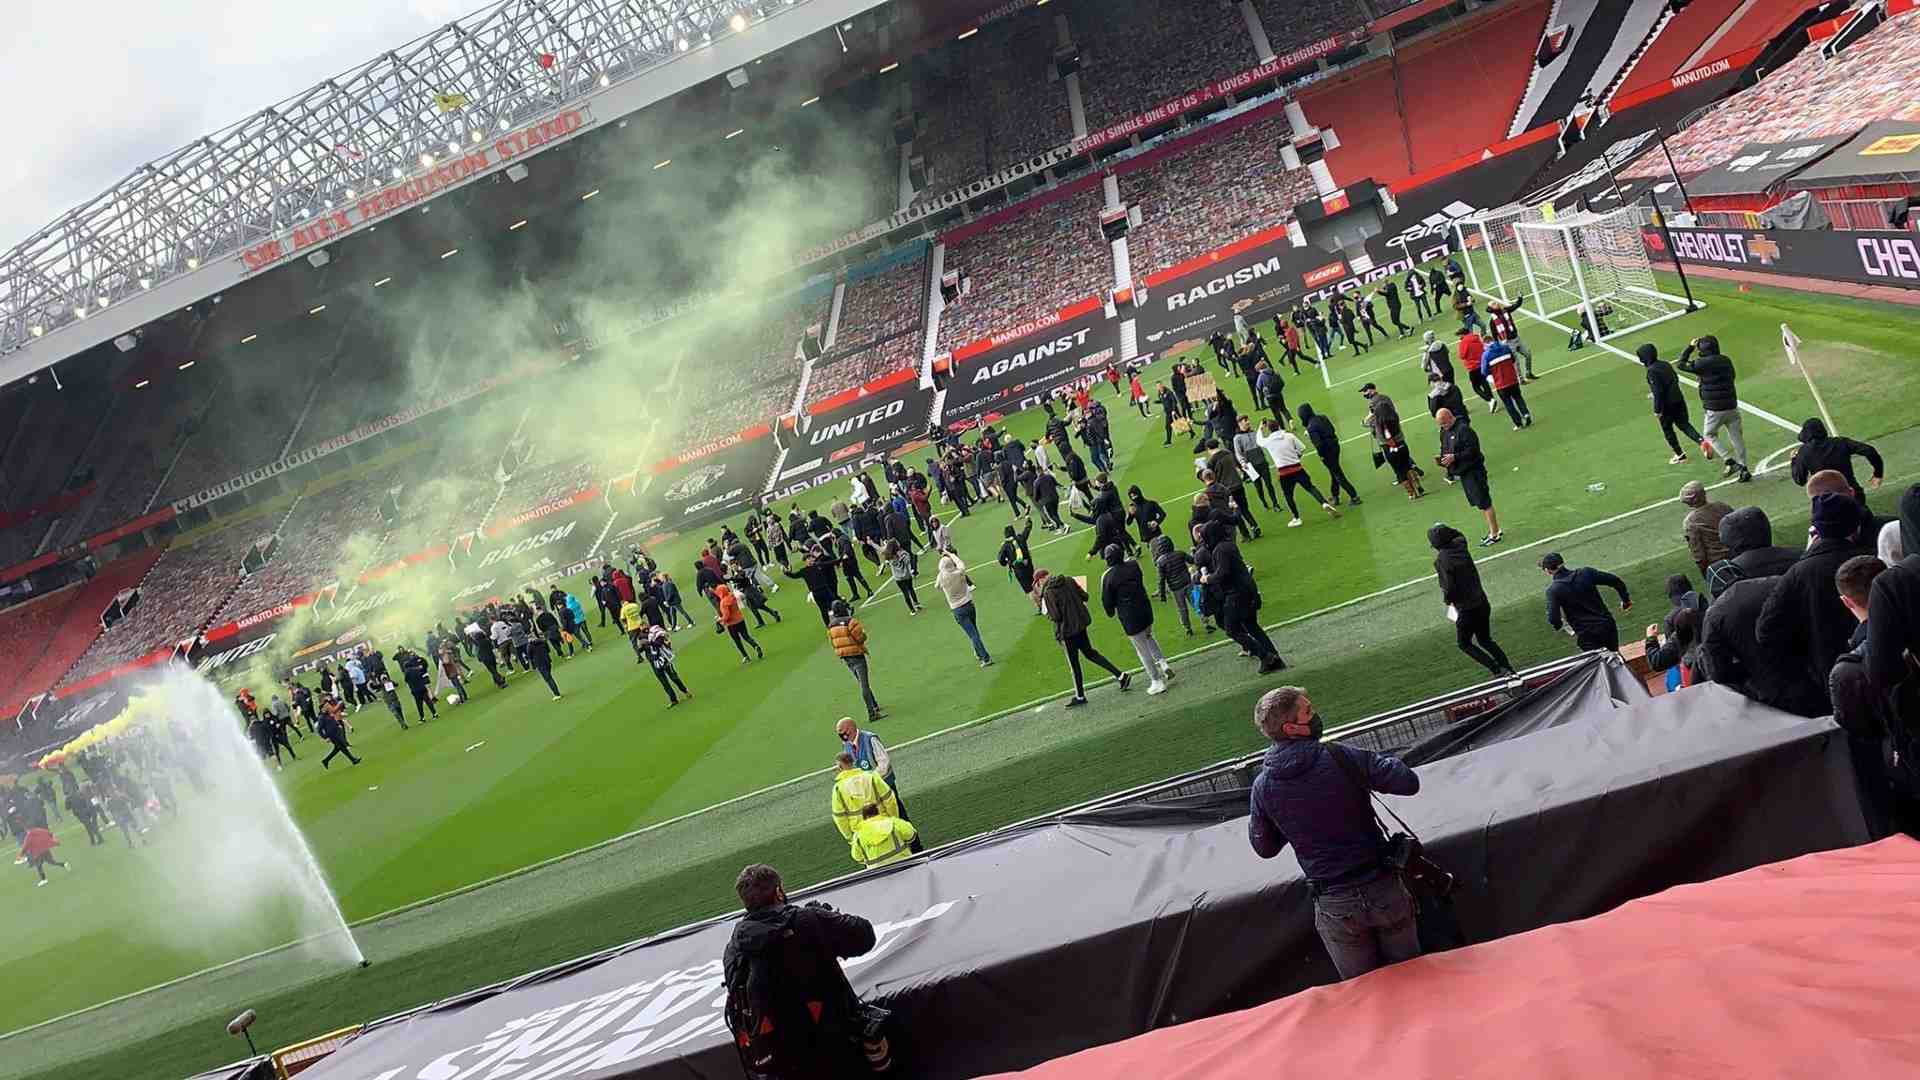 Manchester United fan proests saw fans invade the Old Trafford pitch. (Image: Twitter)